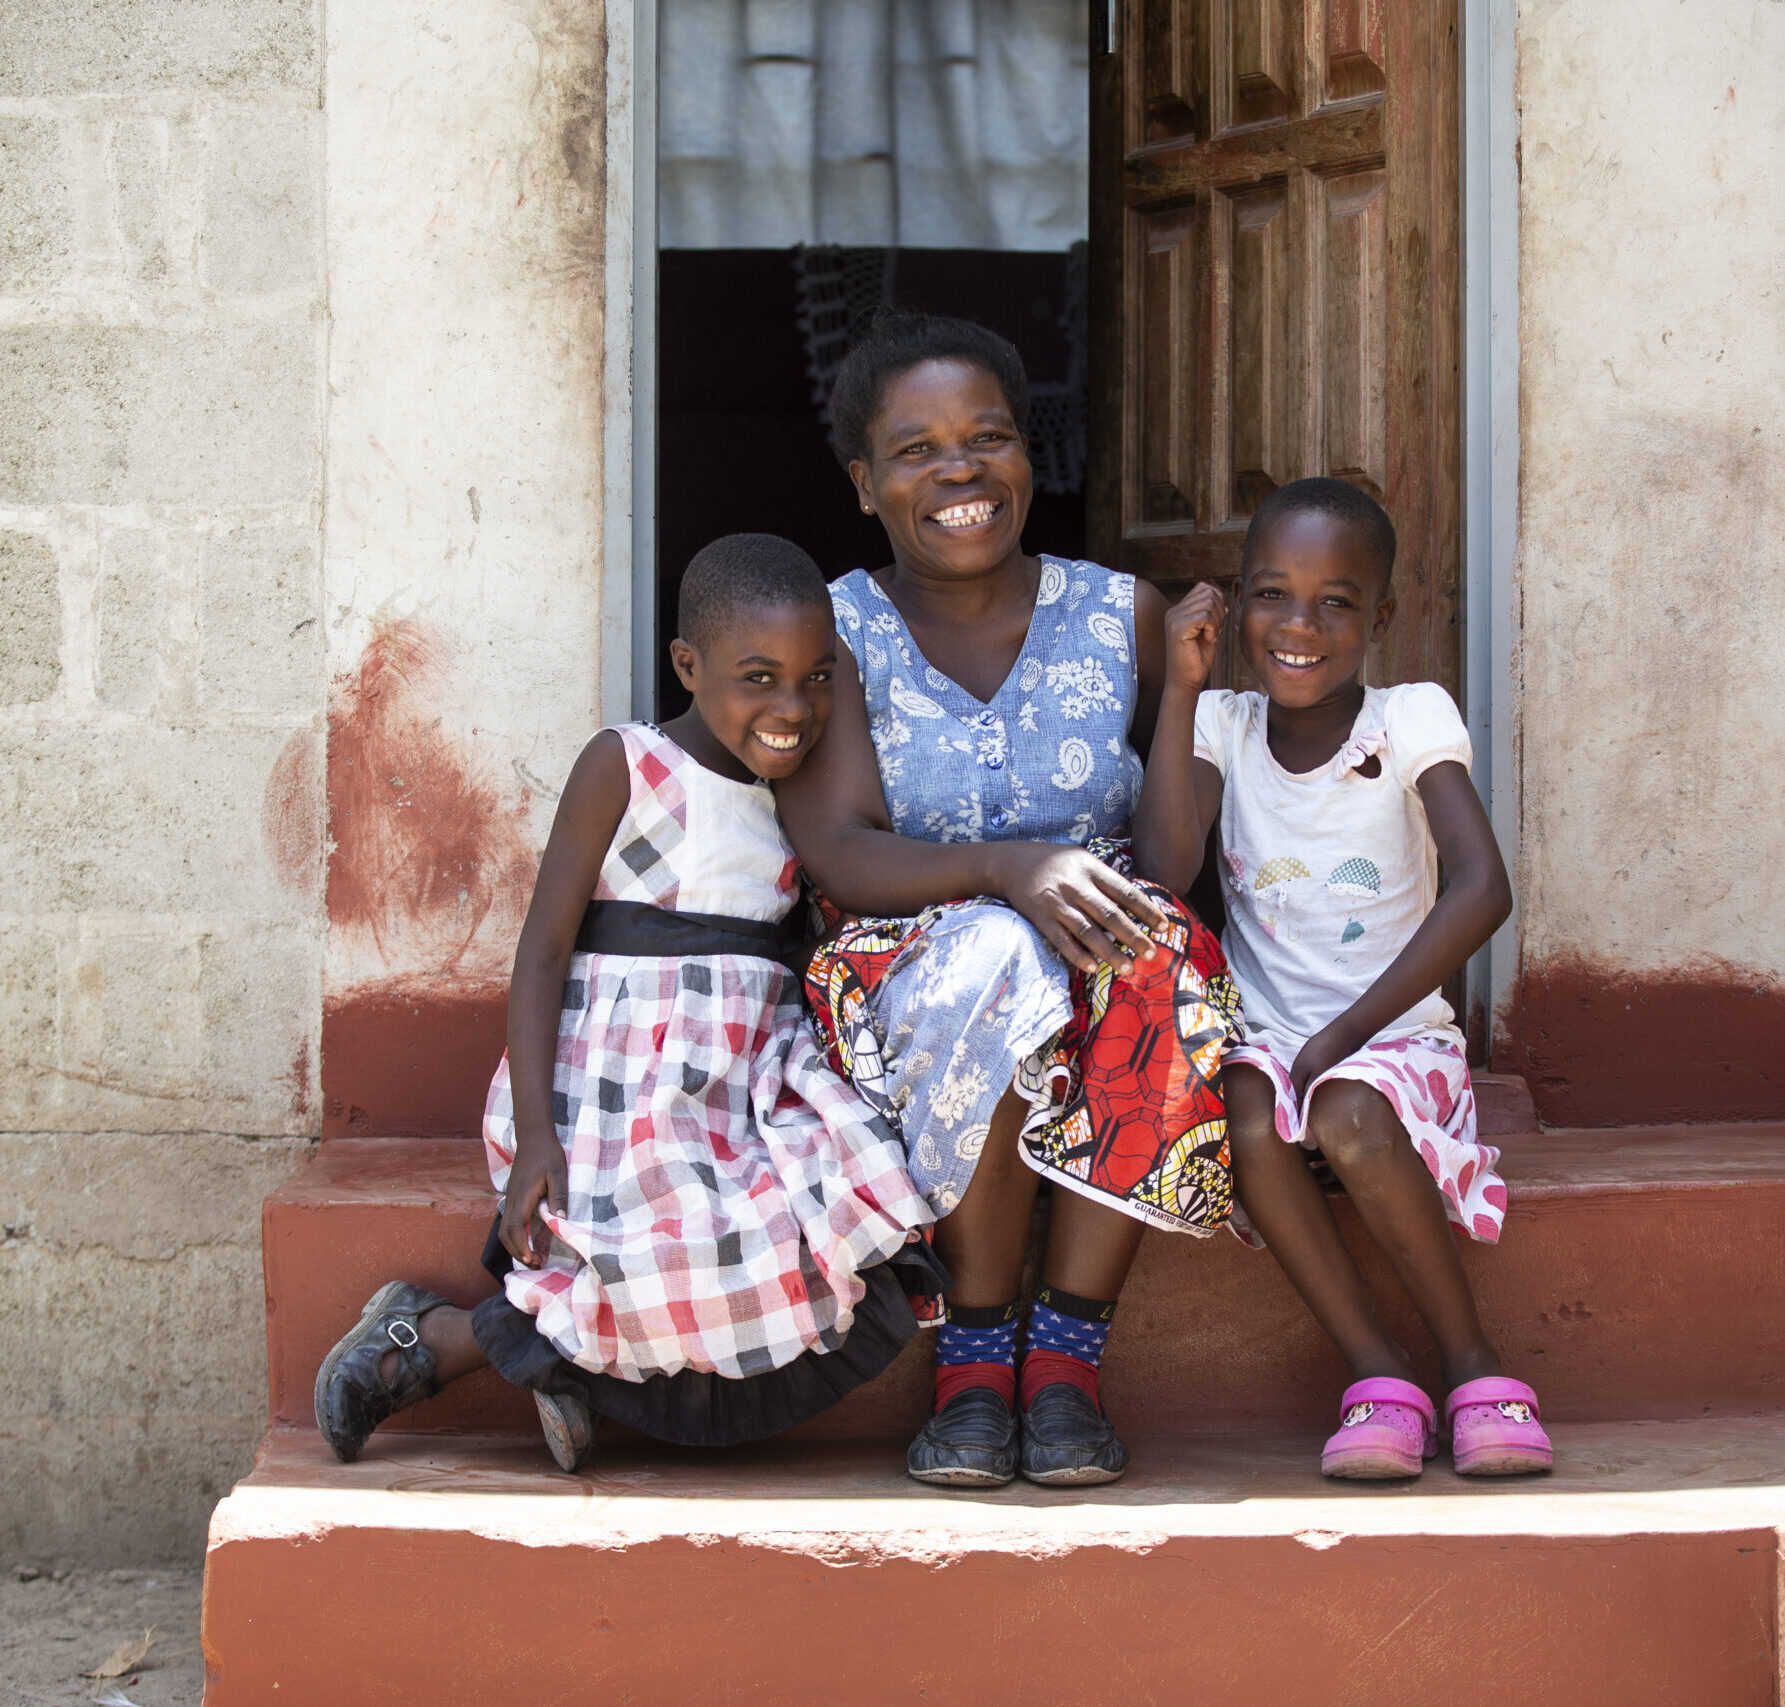 Woman and children on doorstep in Zambia